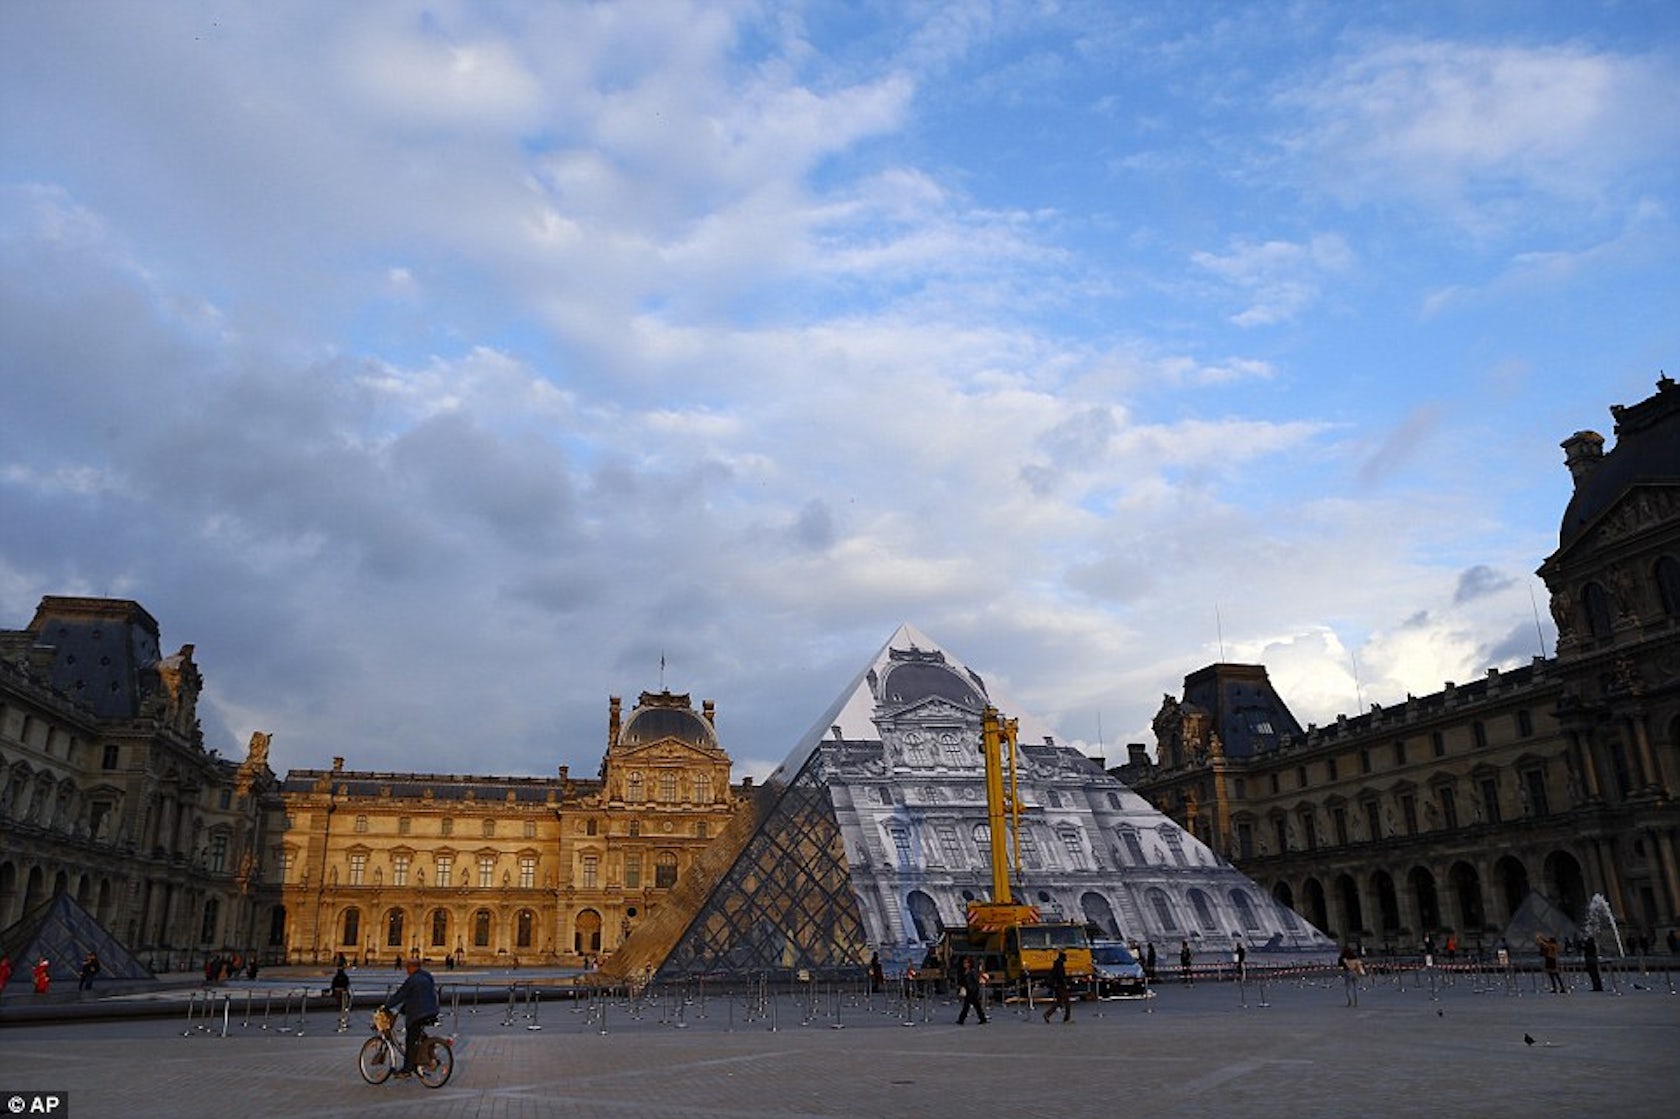 A night at the museum: Louis Vuitton goes to the Louvre